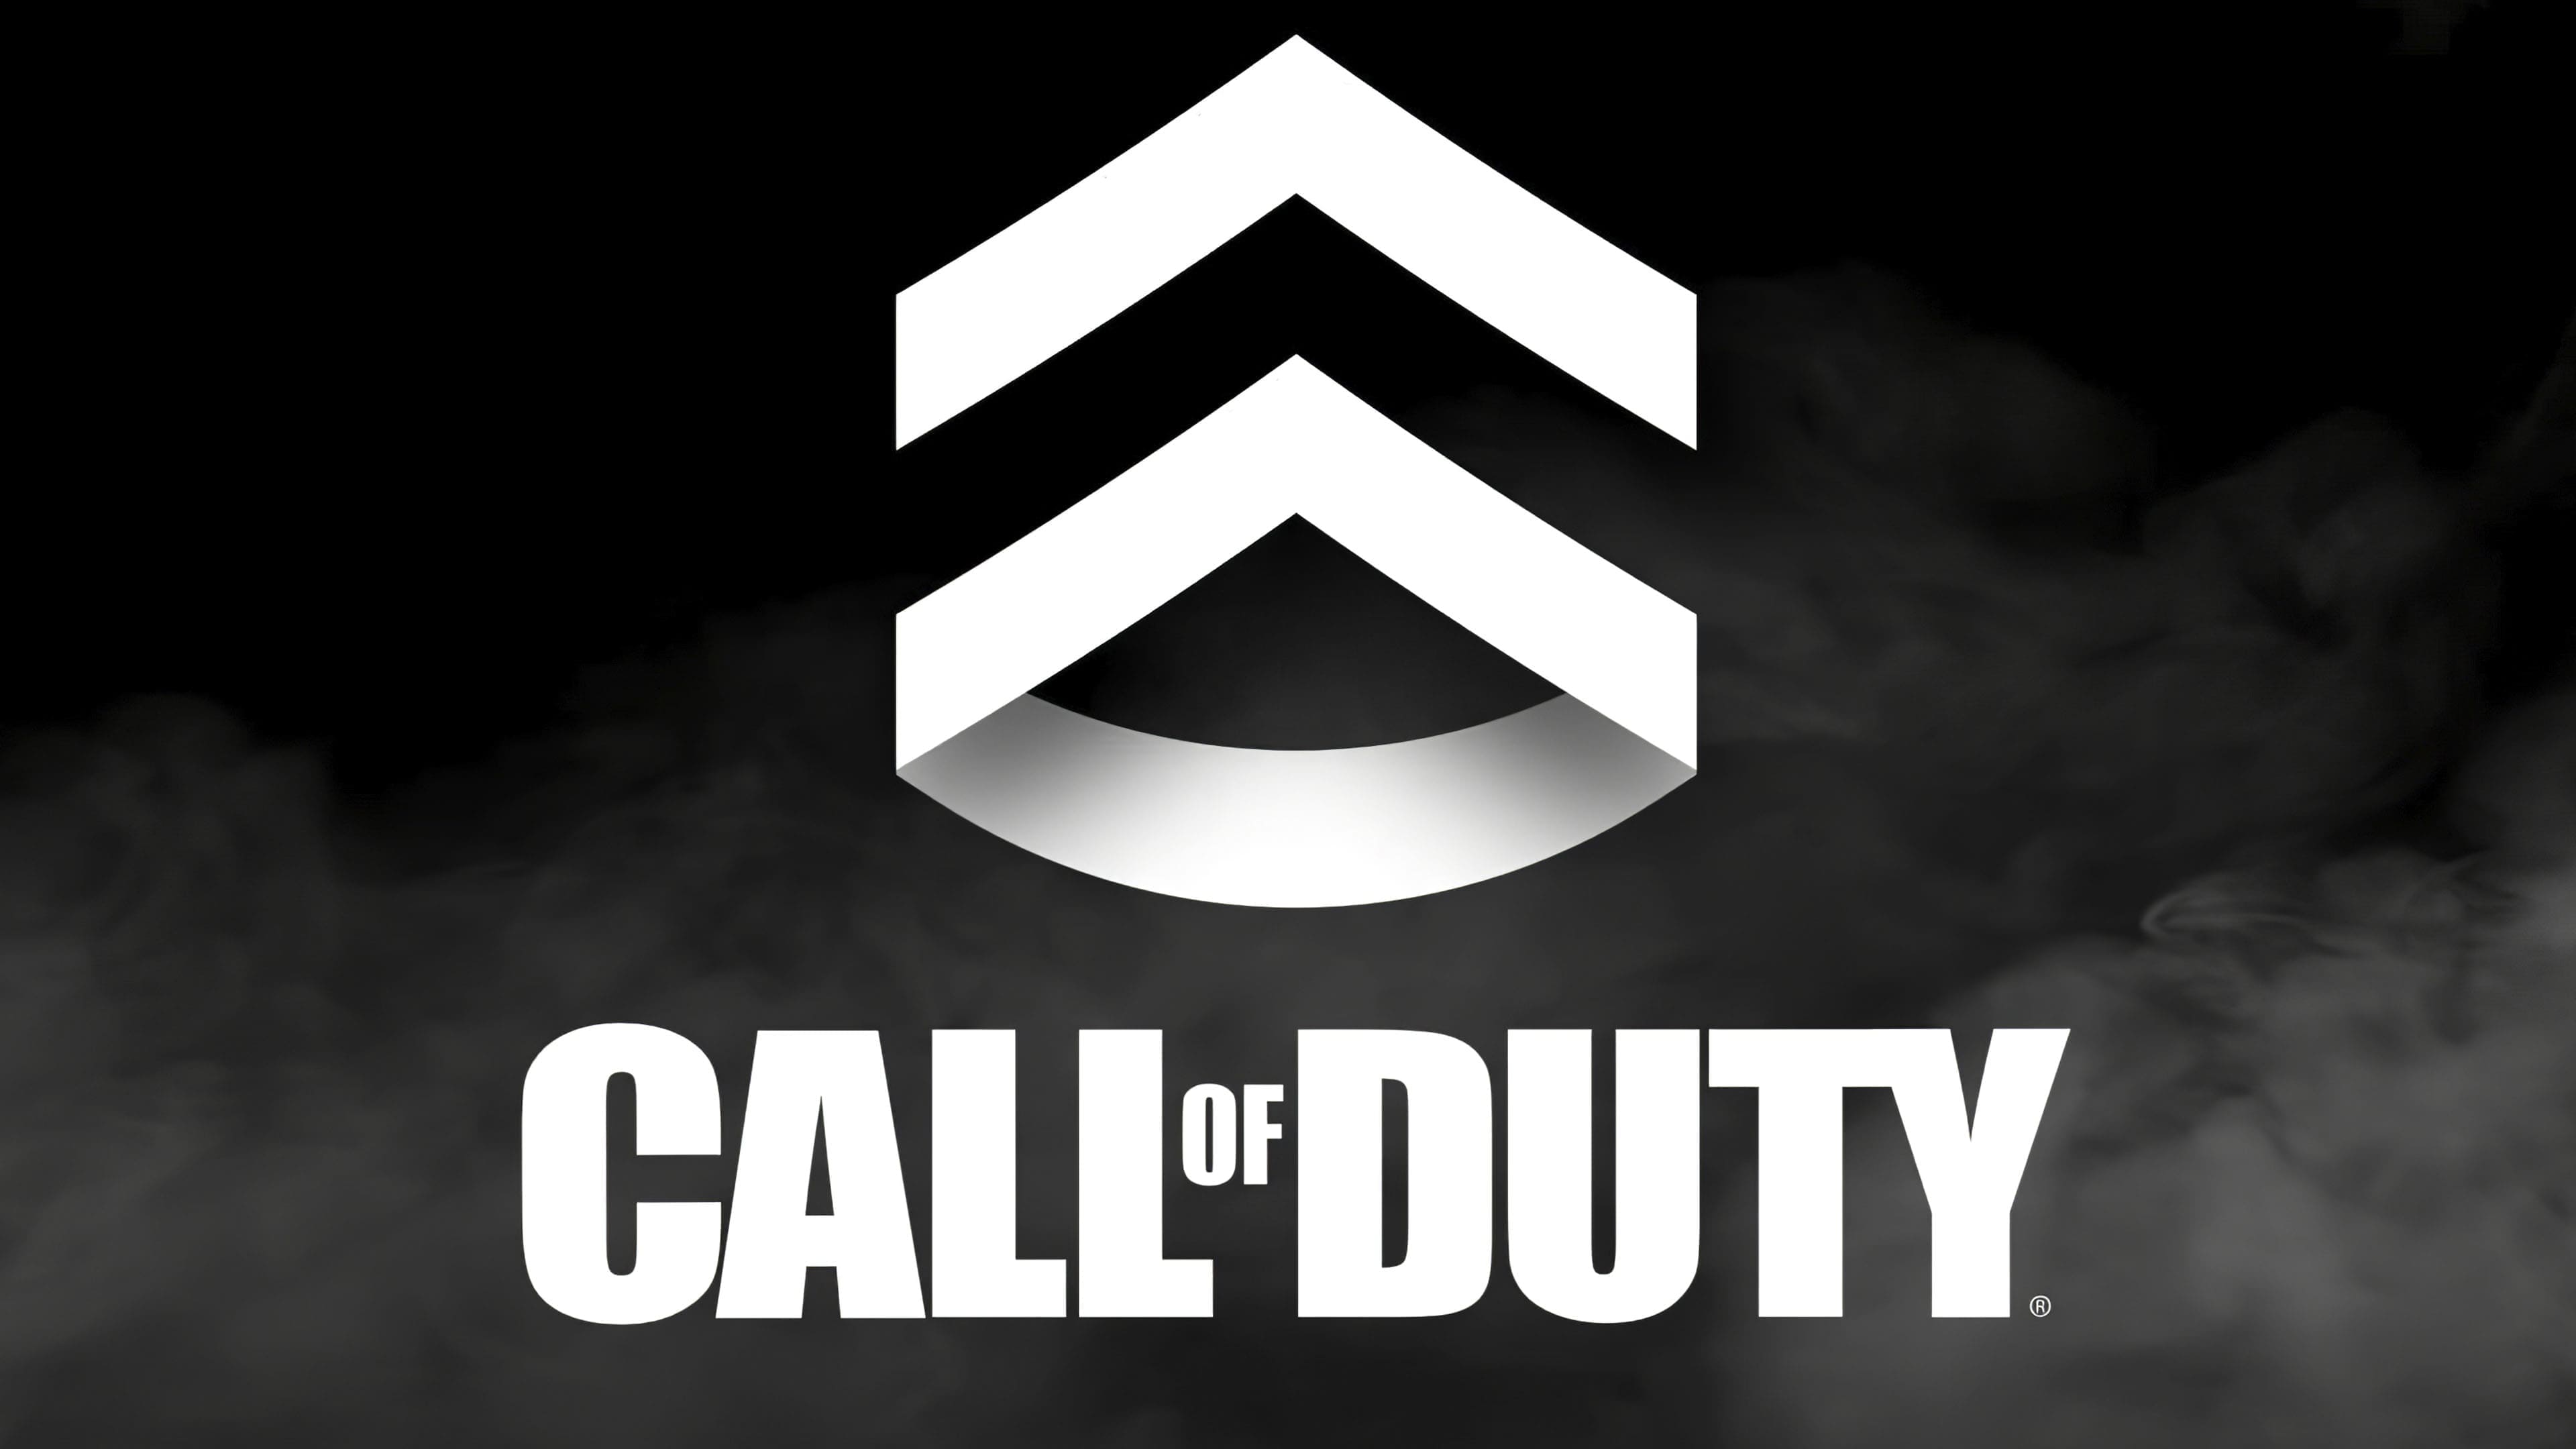 Activision logo and symbol, meaning, history, PNG